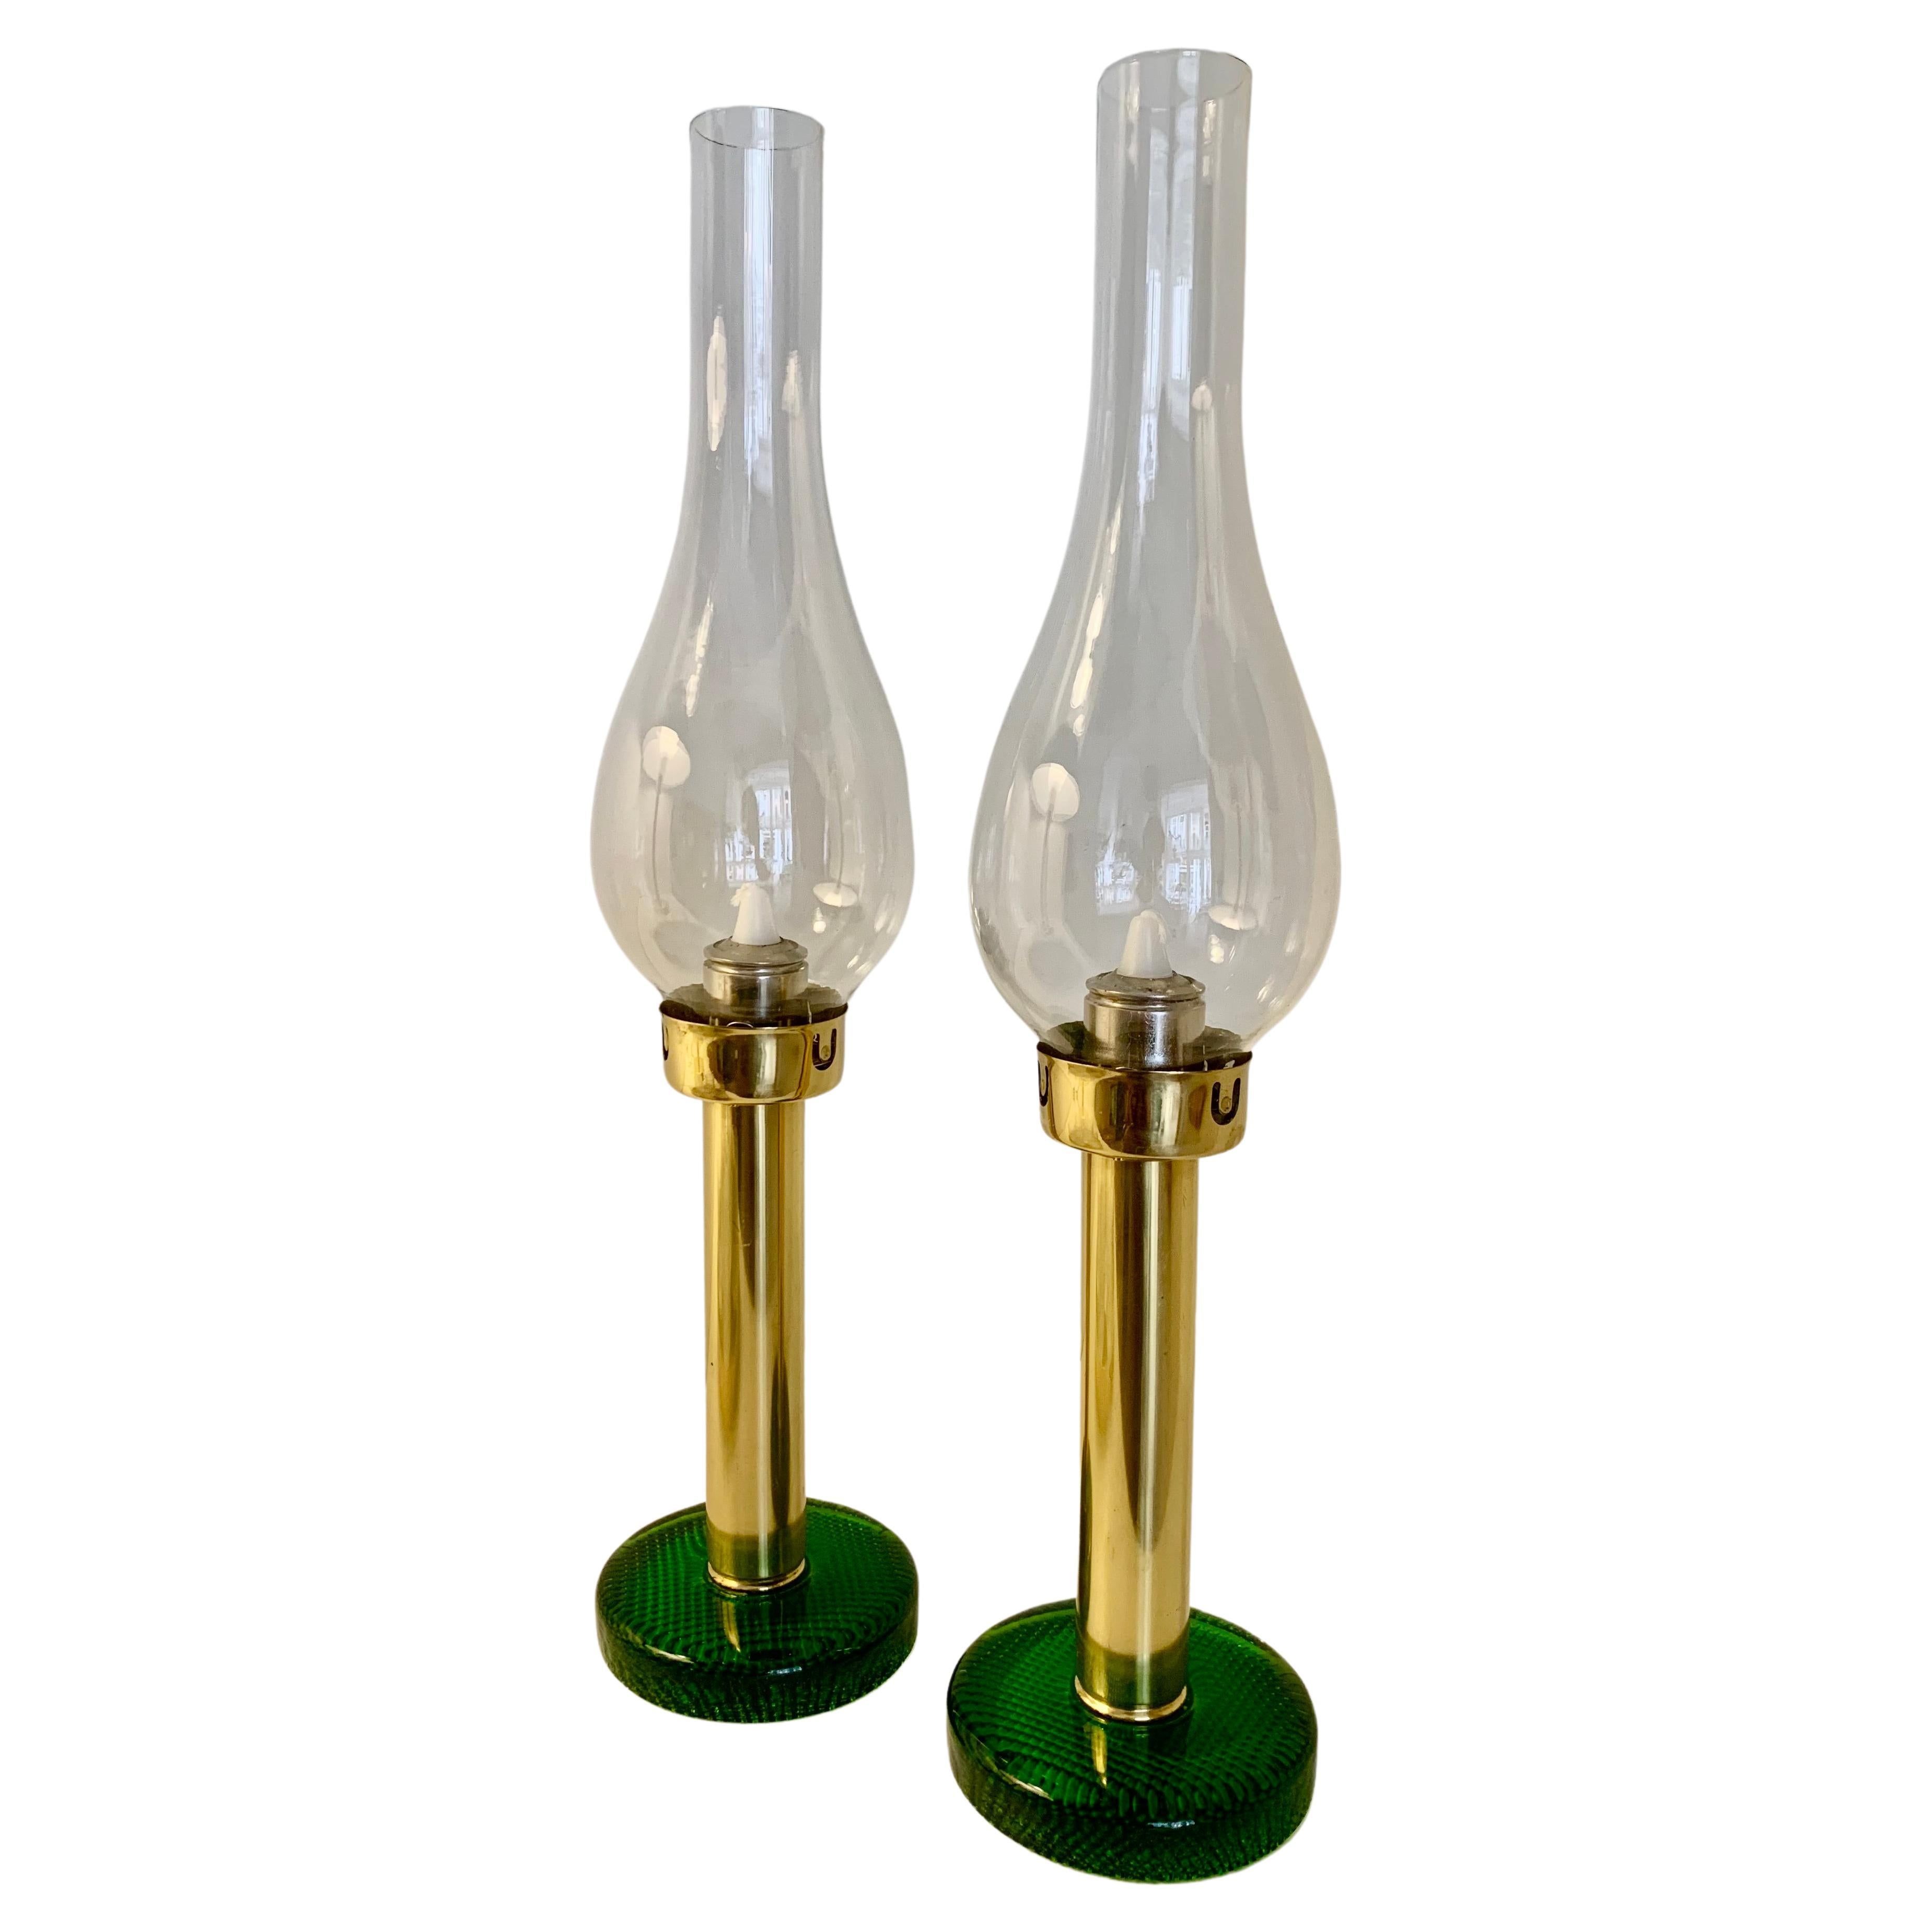 Brass Hurricane Candle Holder by Hans Agne Jakobsson - Pair Available 